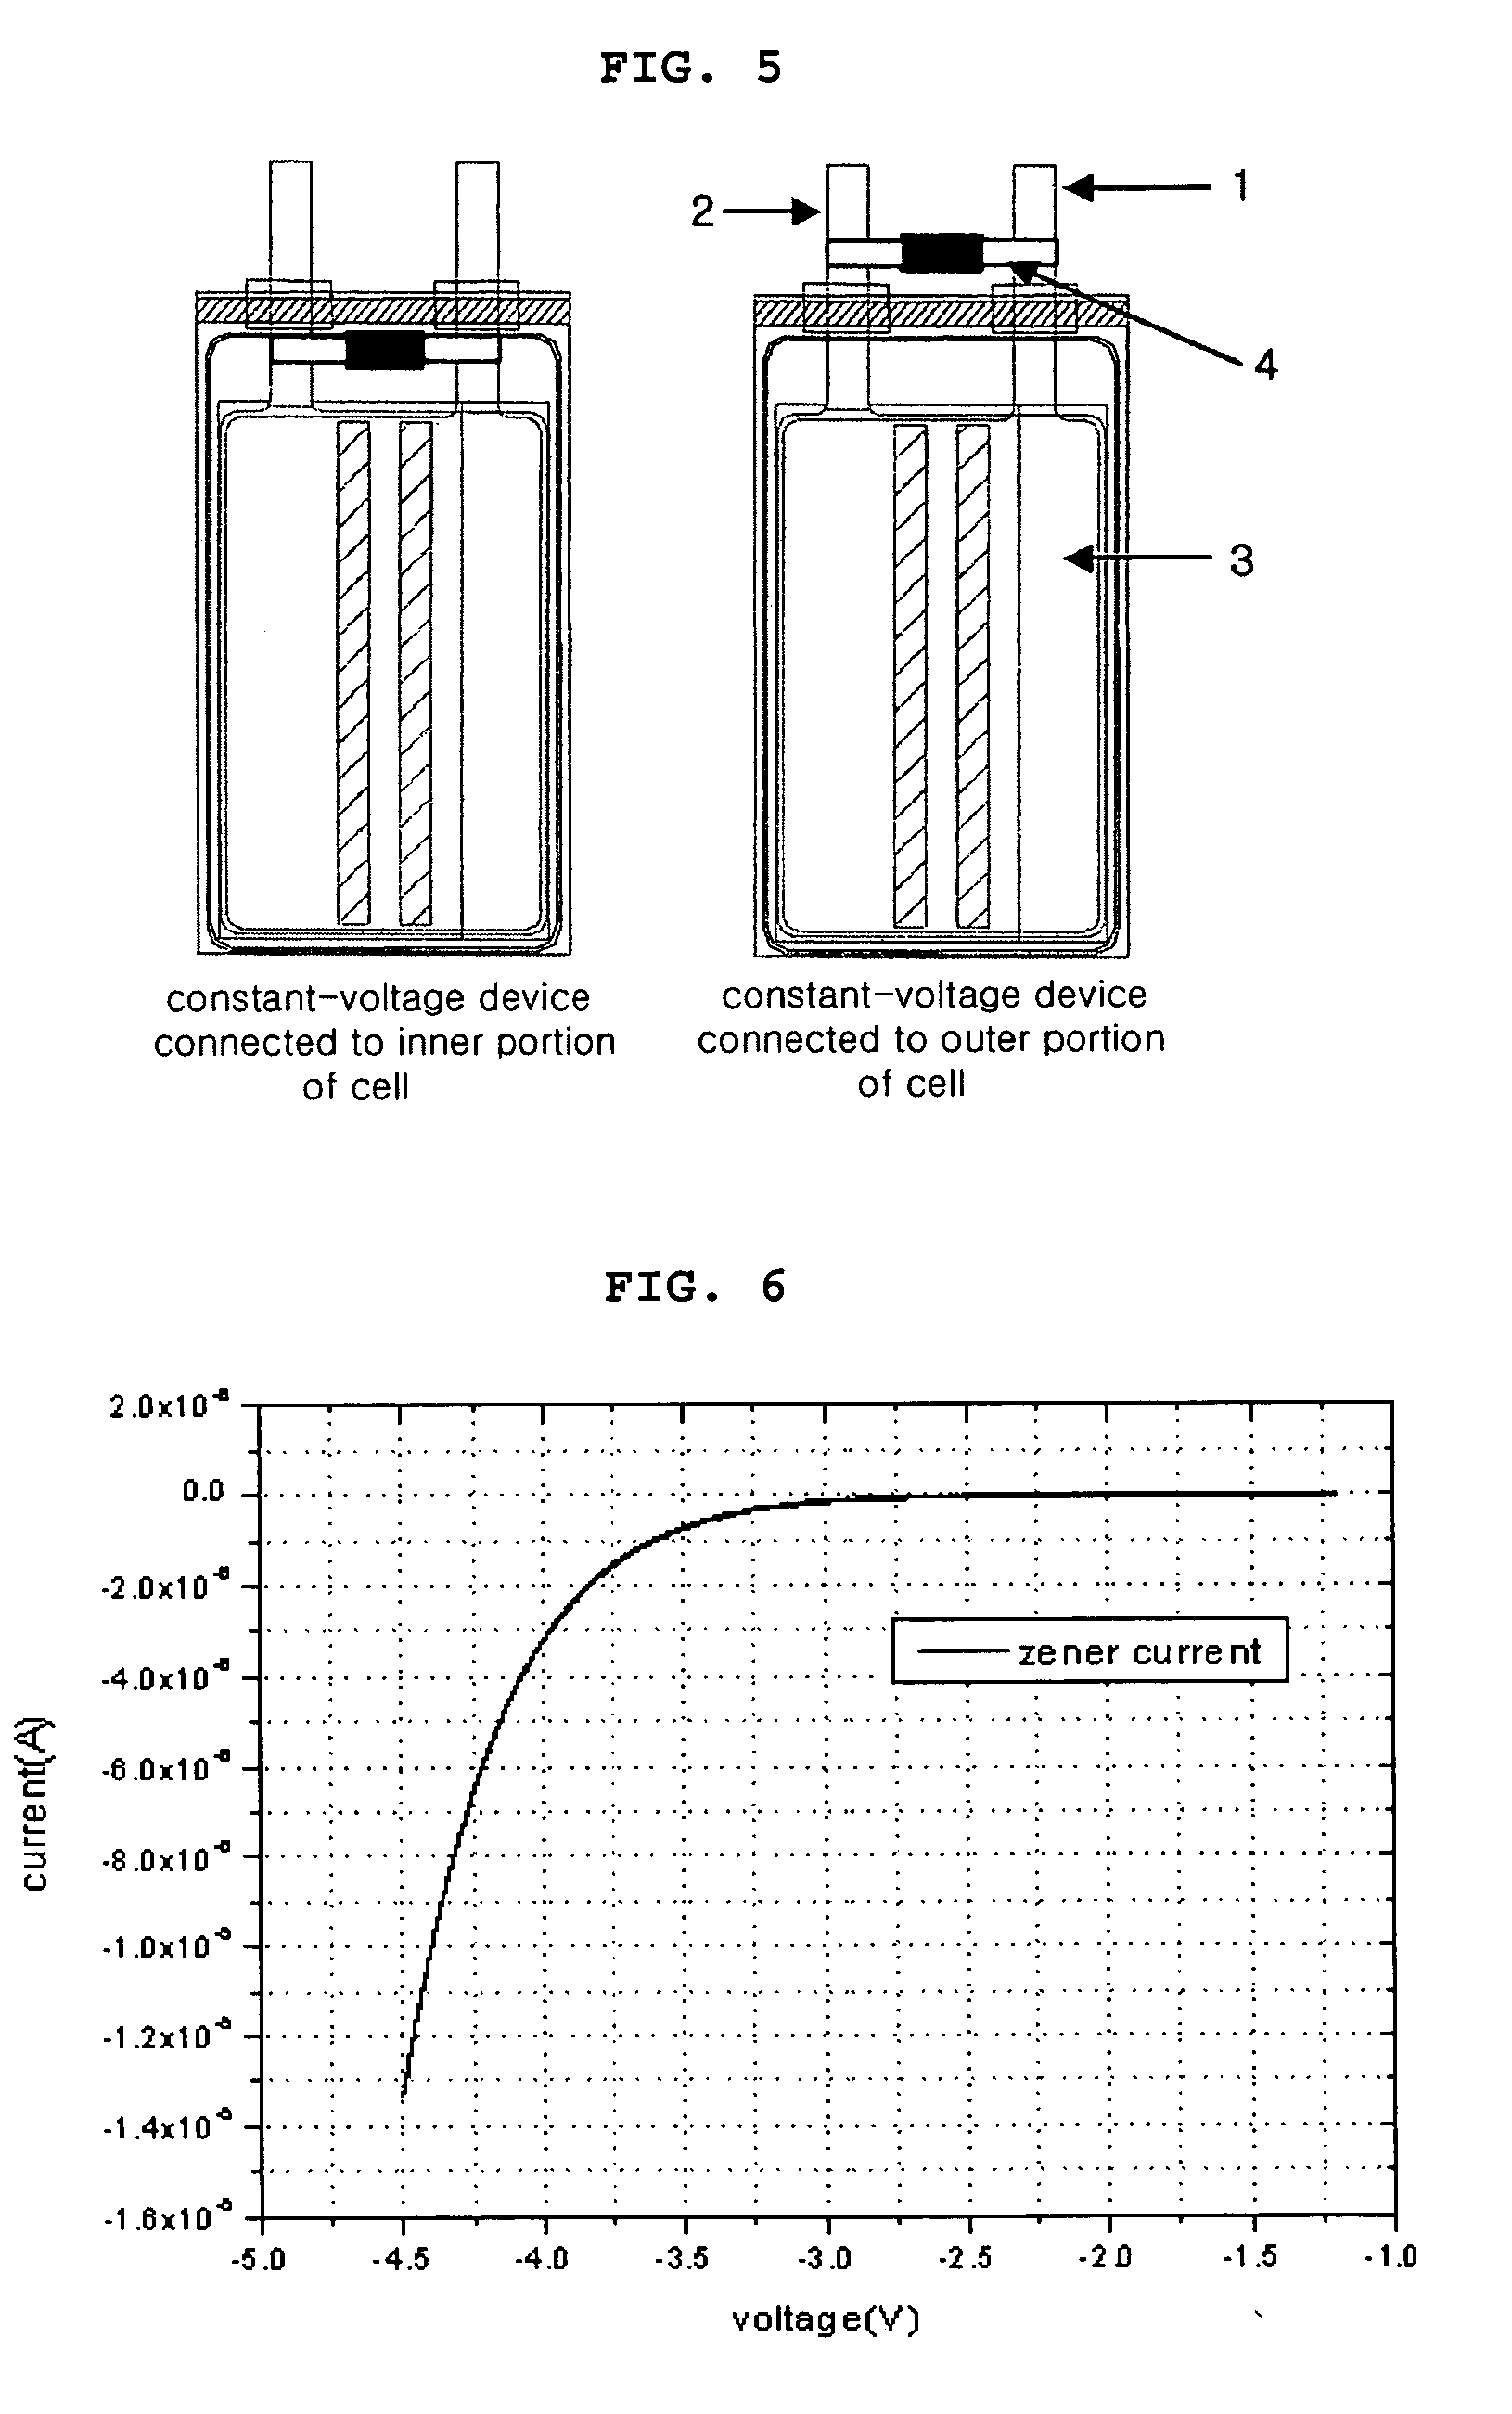 Secondary battery having constant-voltage device